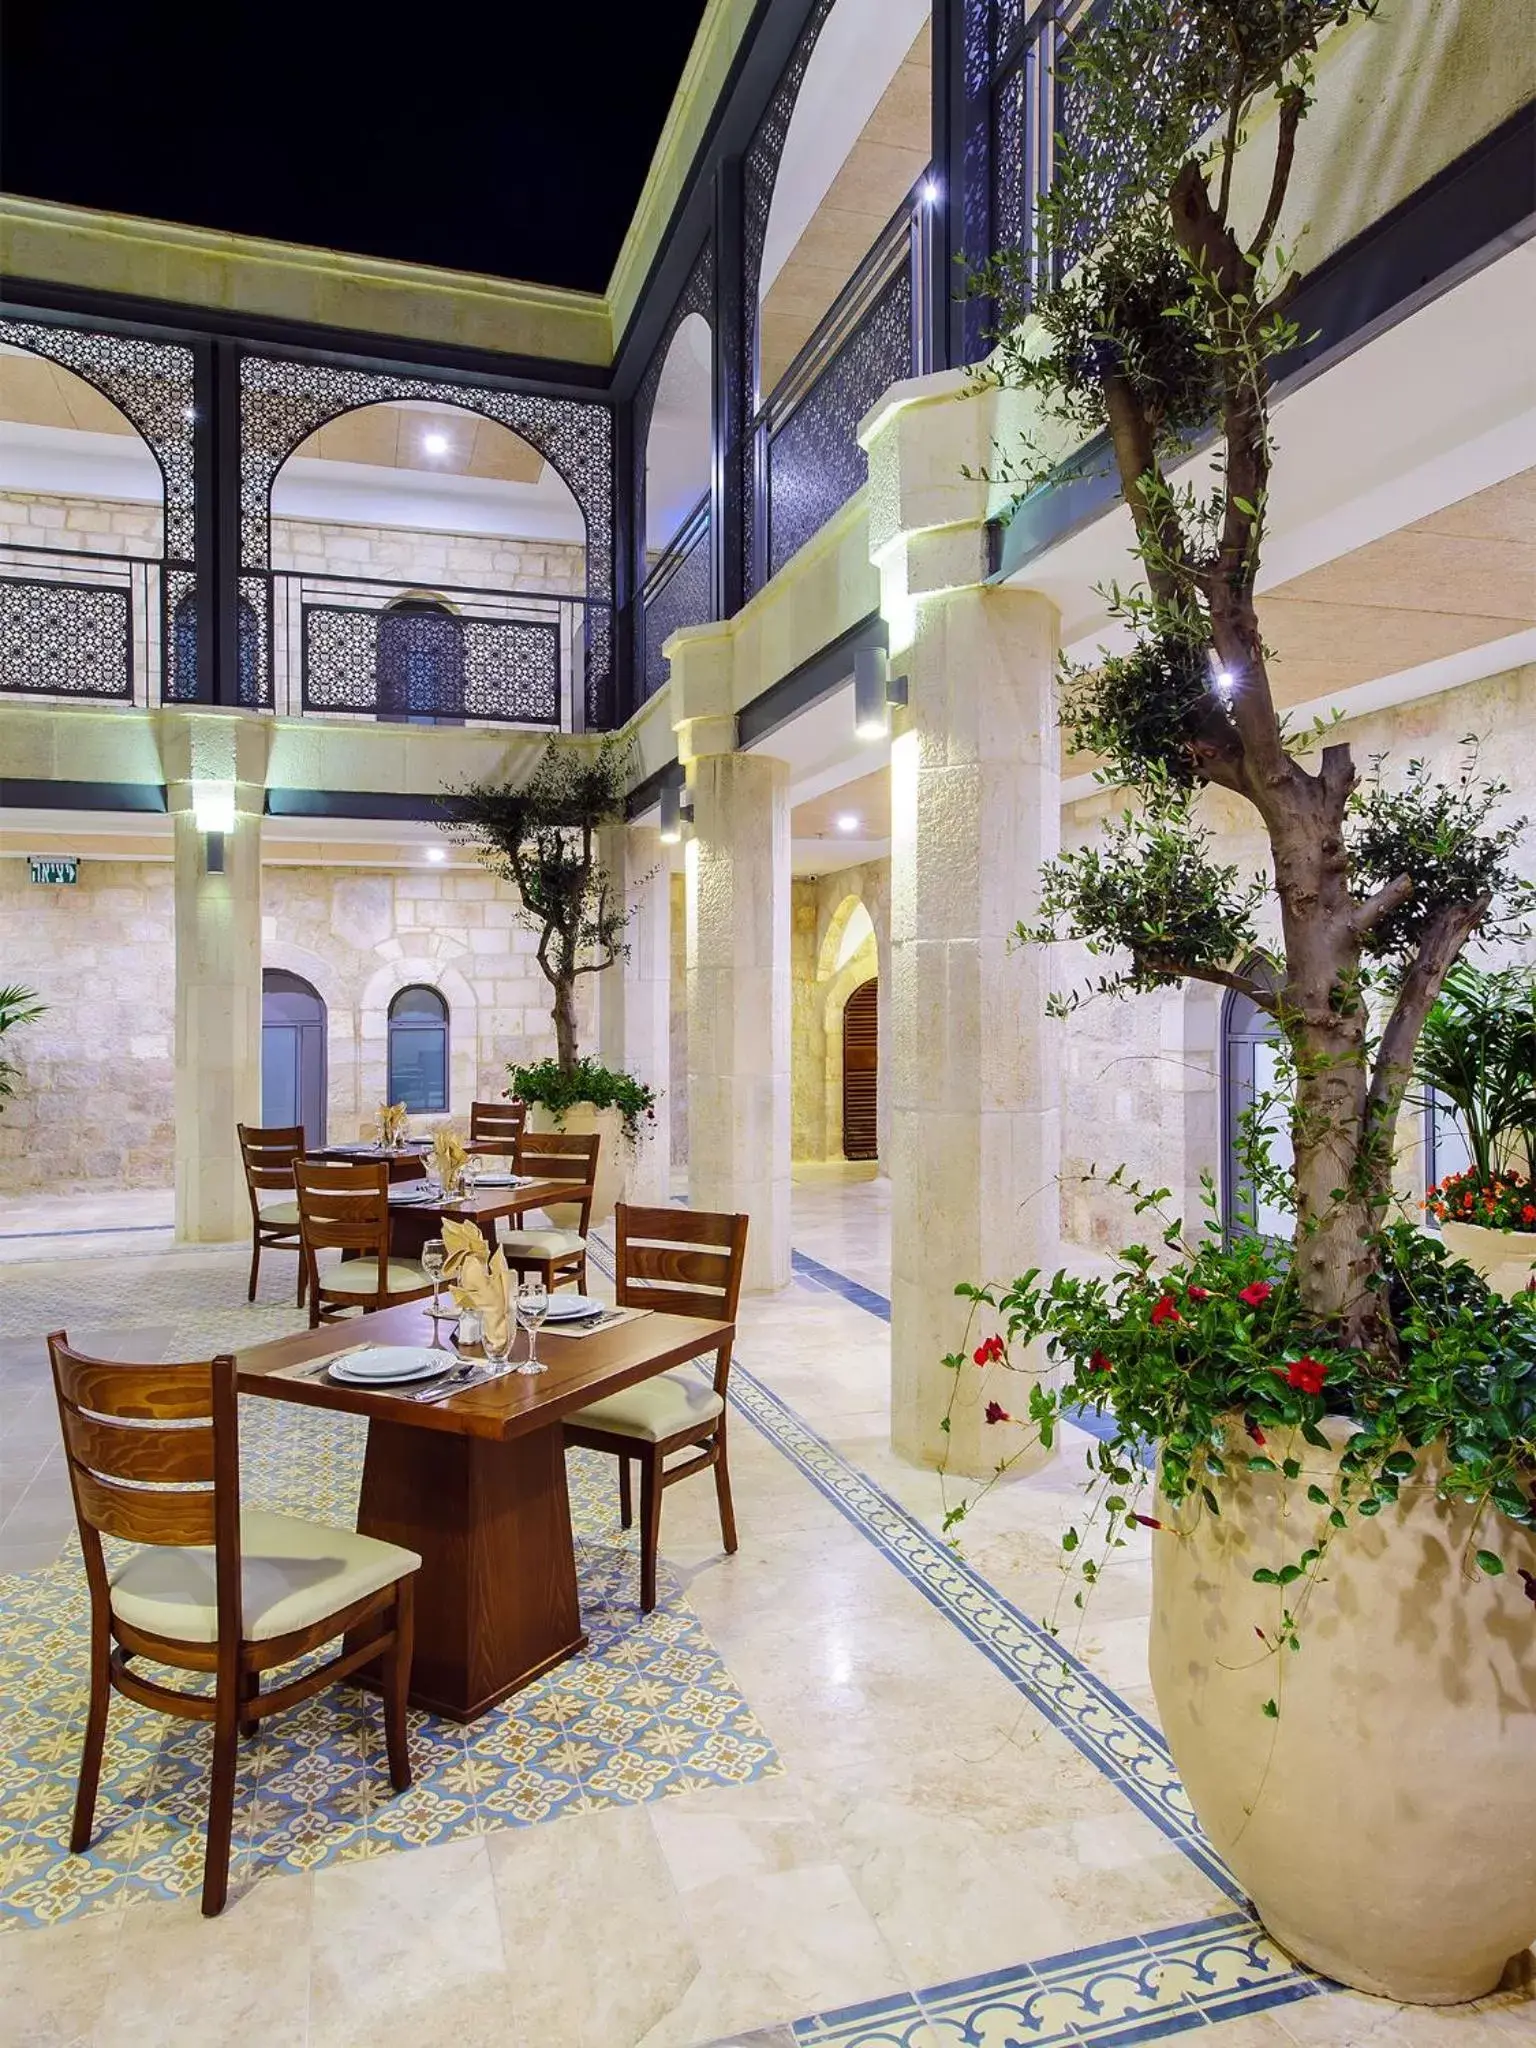 Balcony/Terrace in The Sephardic House Hotel in The Jewish Quarter